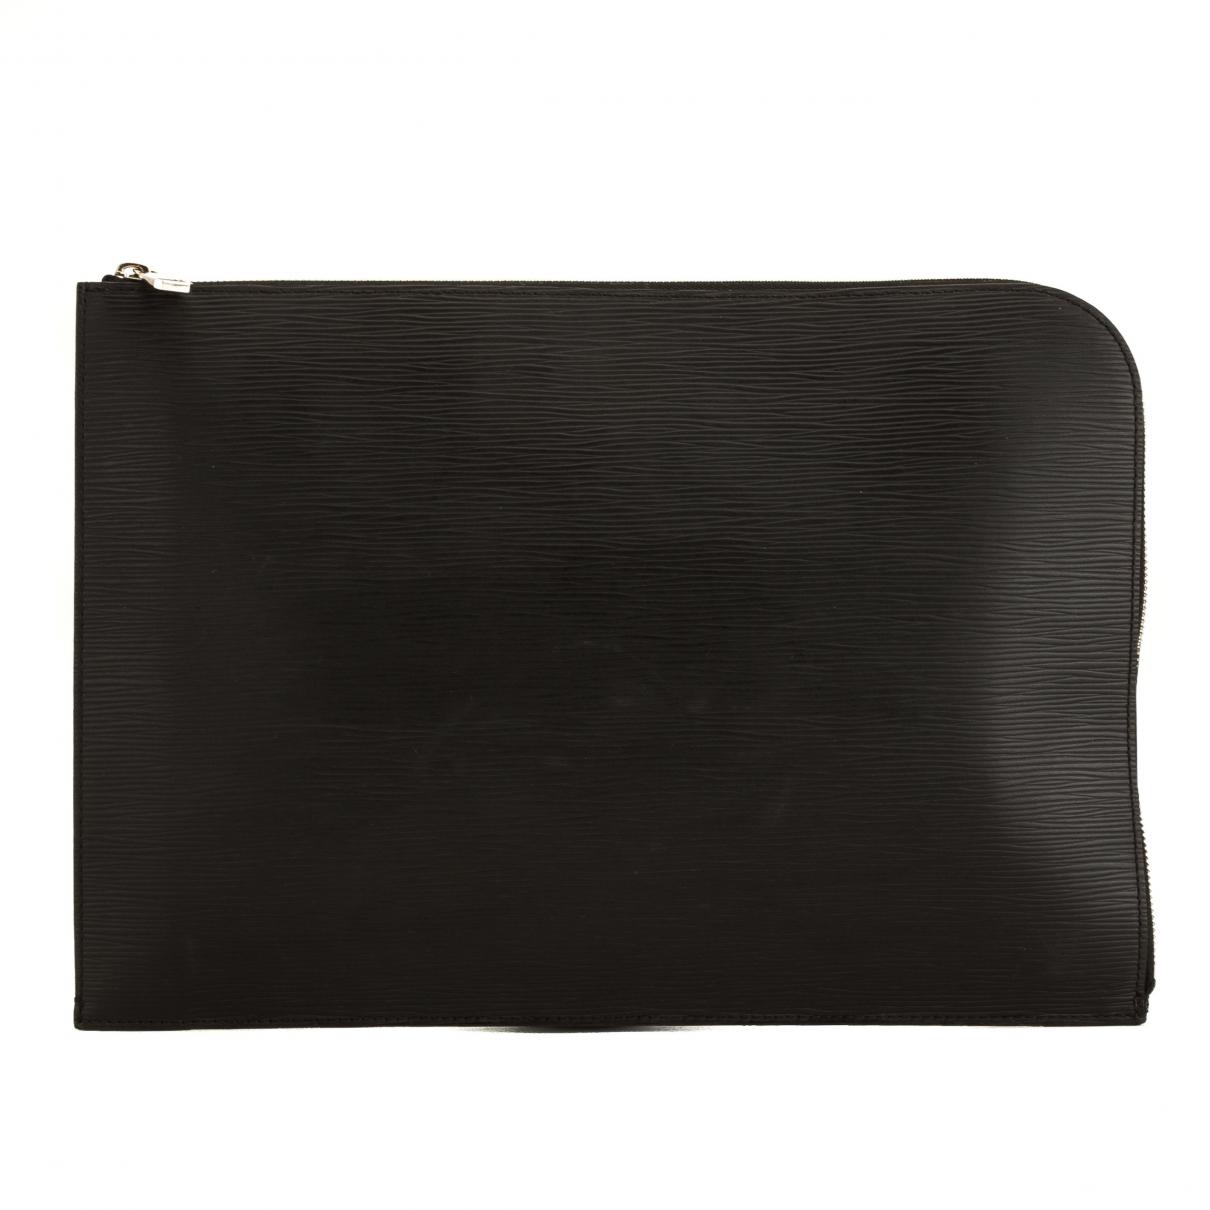 Lyst - Louis Vuitton Other Leather Home Decor in Black for Men